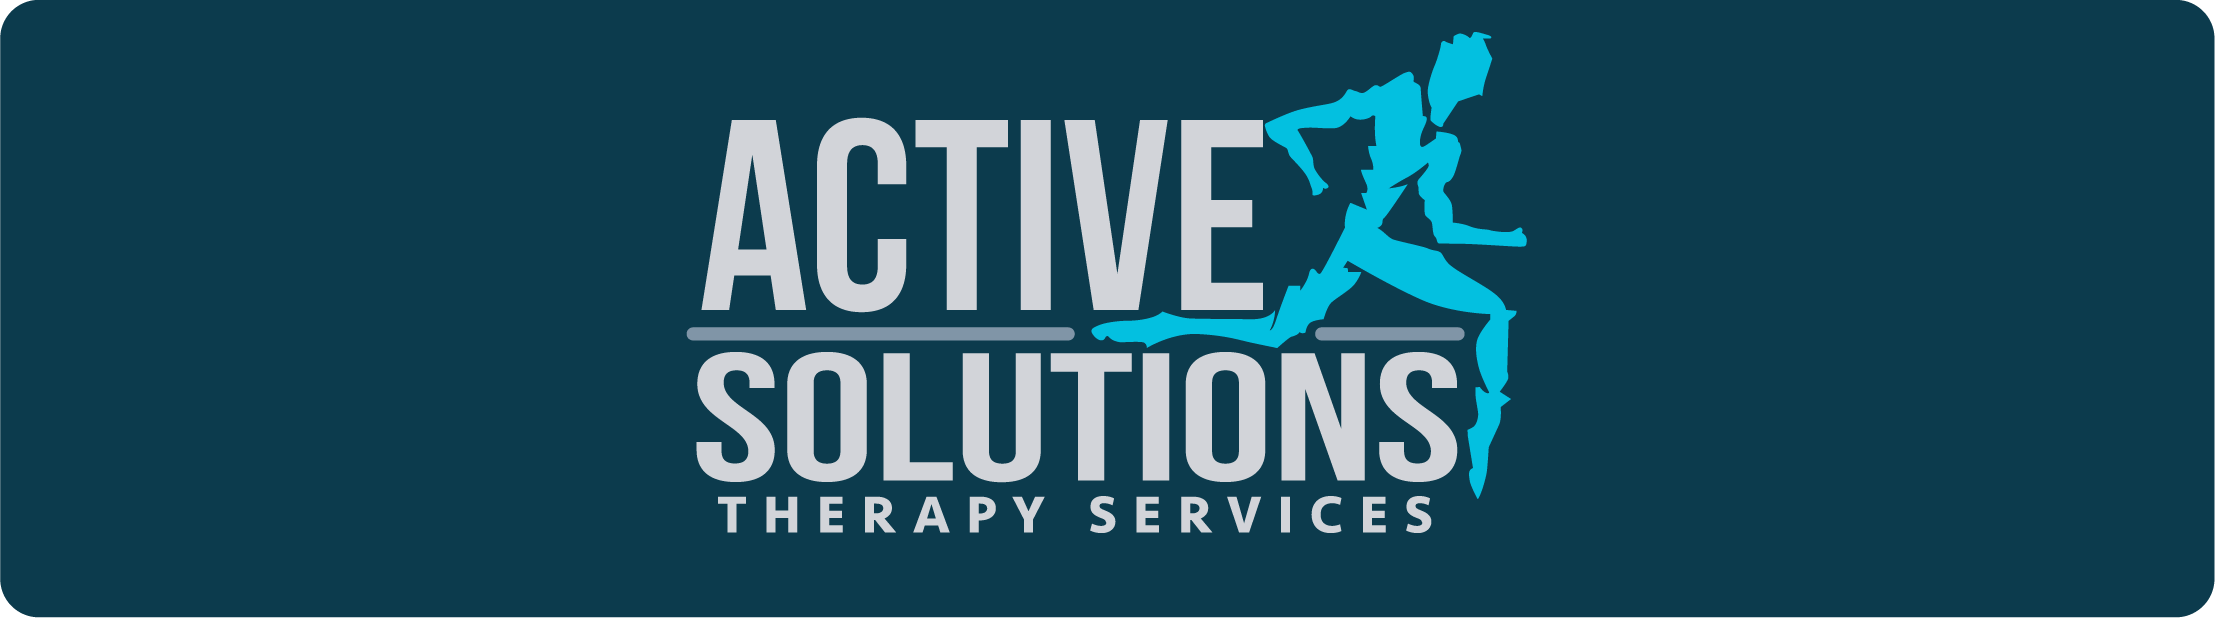 Active Solutions Therapy Inc.